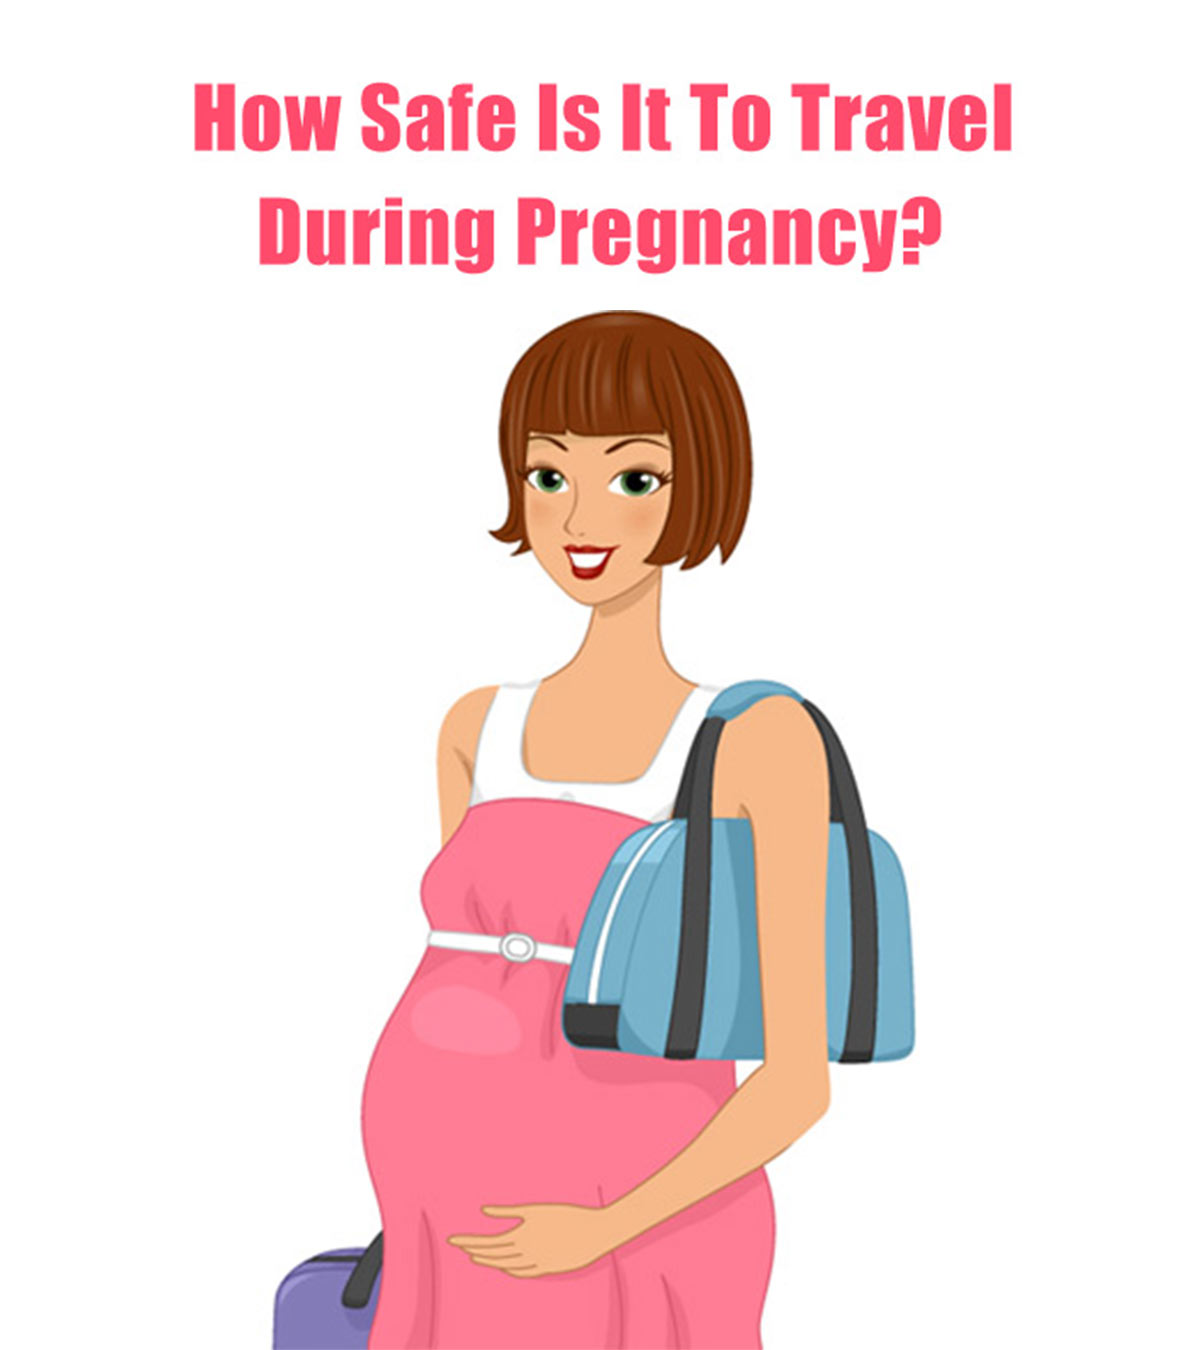 How Safe Is It To Travel During Pregnancy?